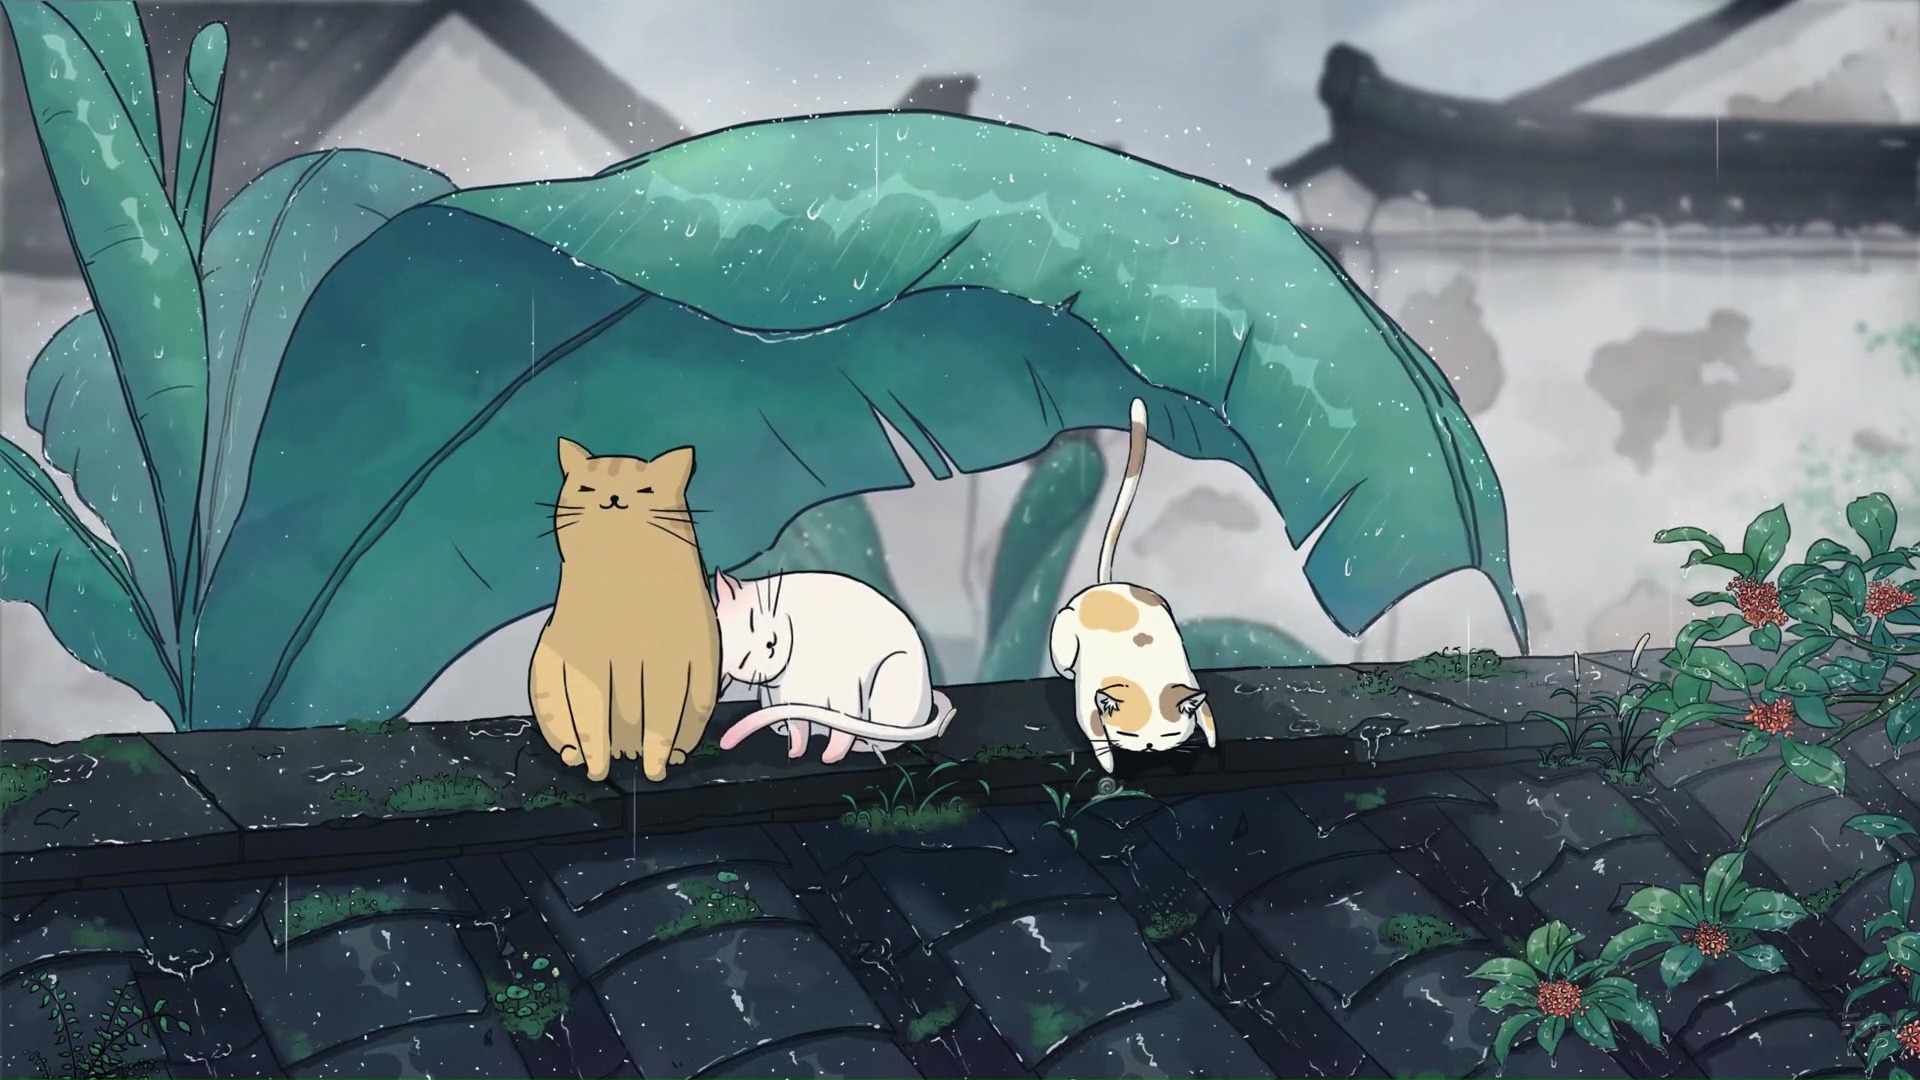 Cats Chill In A Rainy Day Live Wallpaper - HDLiveWall.com.